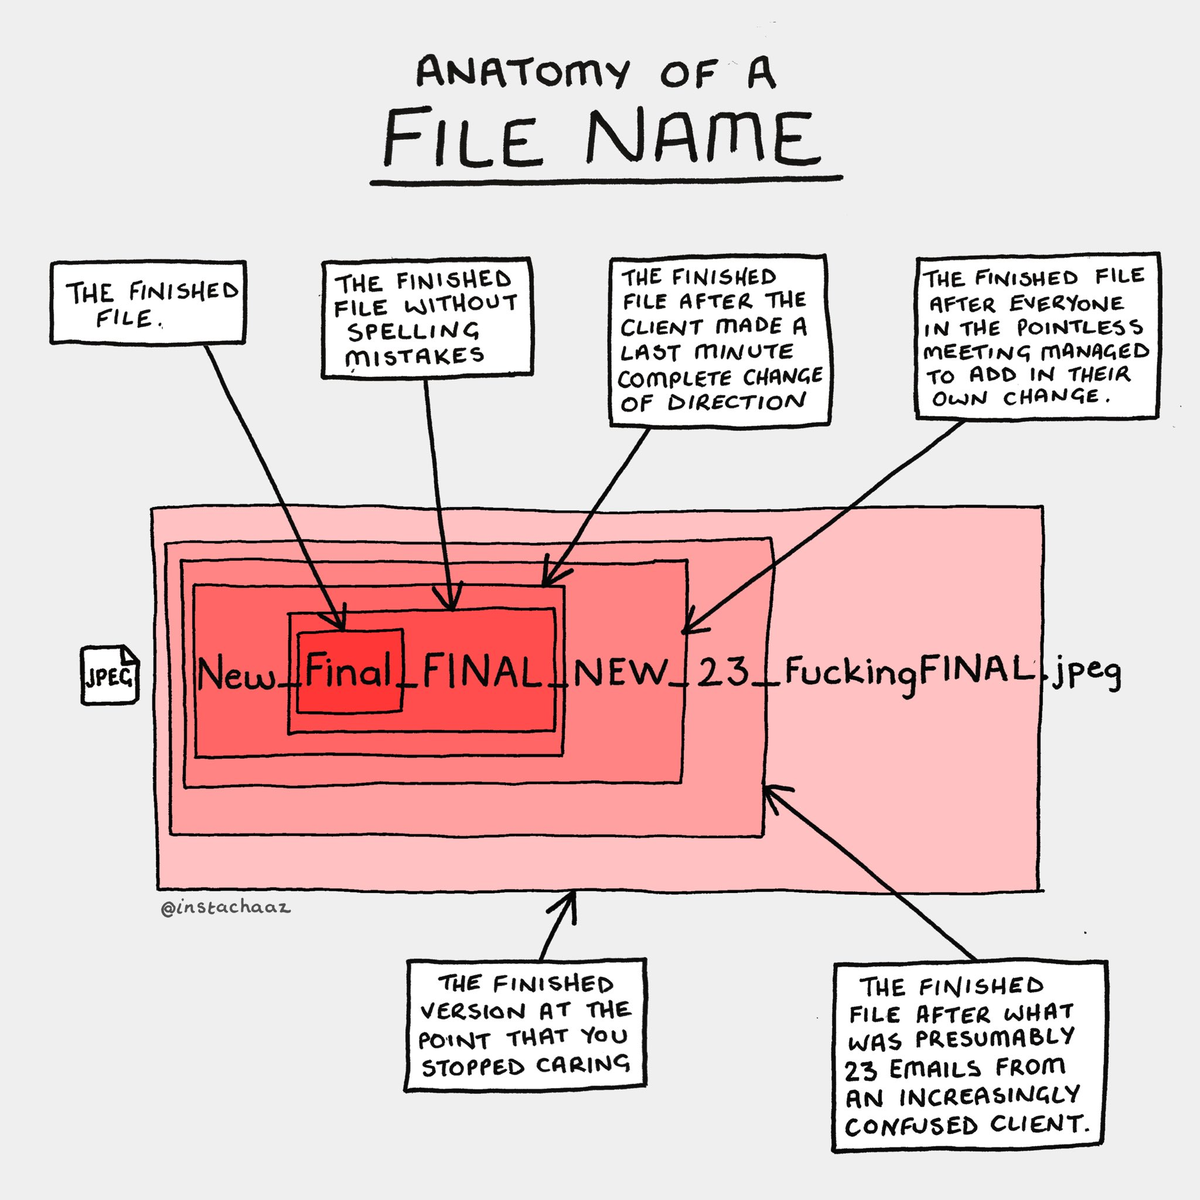 Title: anatomy of a file name. A file name that shows 'New_Final_final_new-23_fuckingfinal. jpeg'. For each component a box with explanation is added. For the first final the description 'the finished file' is added. For the second final the box says 'the finished file wihtout spelling mistakes. For New-final-final the box says 'the finished file after the client made a last minute complete change of direction. For the added new the box says 'the finished file after everyone in the pointless meeting managed to add in their own change. The 23 box says 'the finished file after was presumably 23 emails'. For fucking final the box says 'the finished version at the point that you stopped caring'